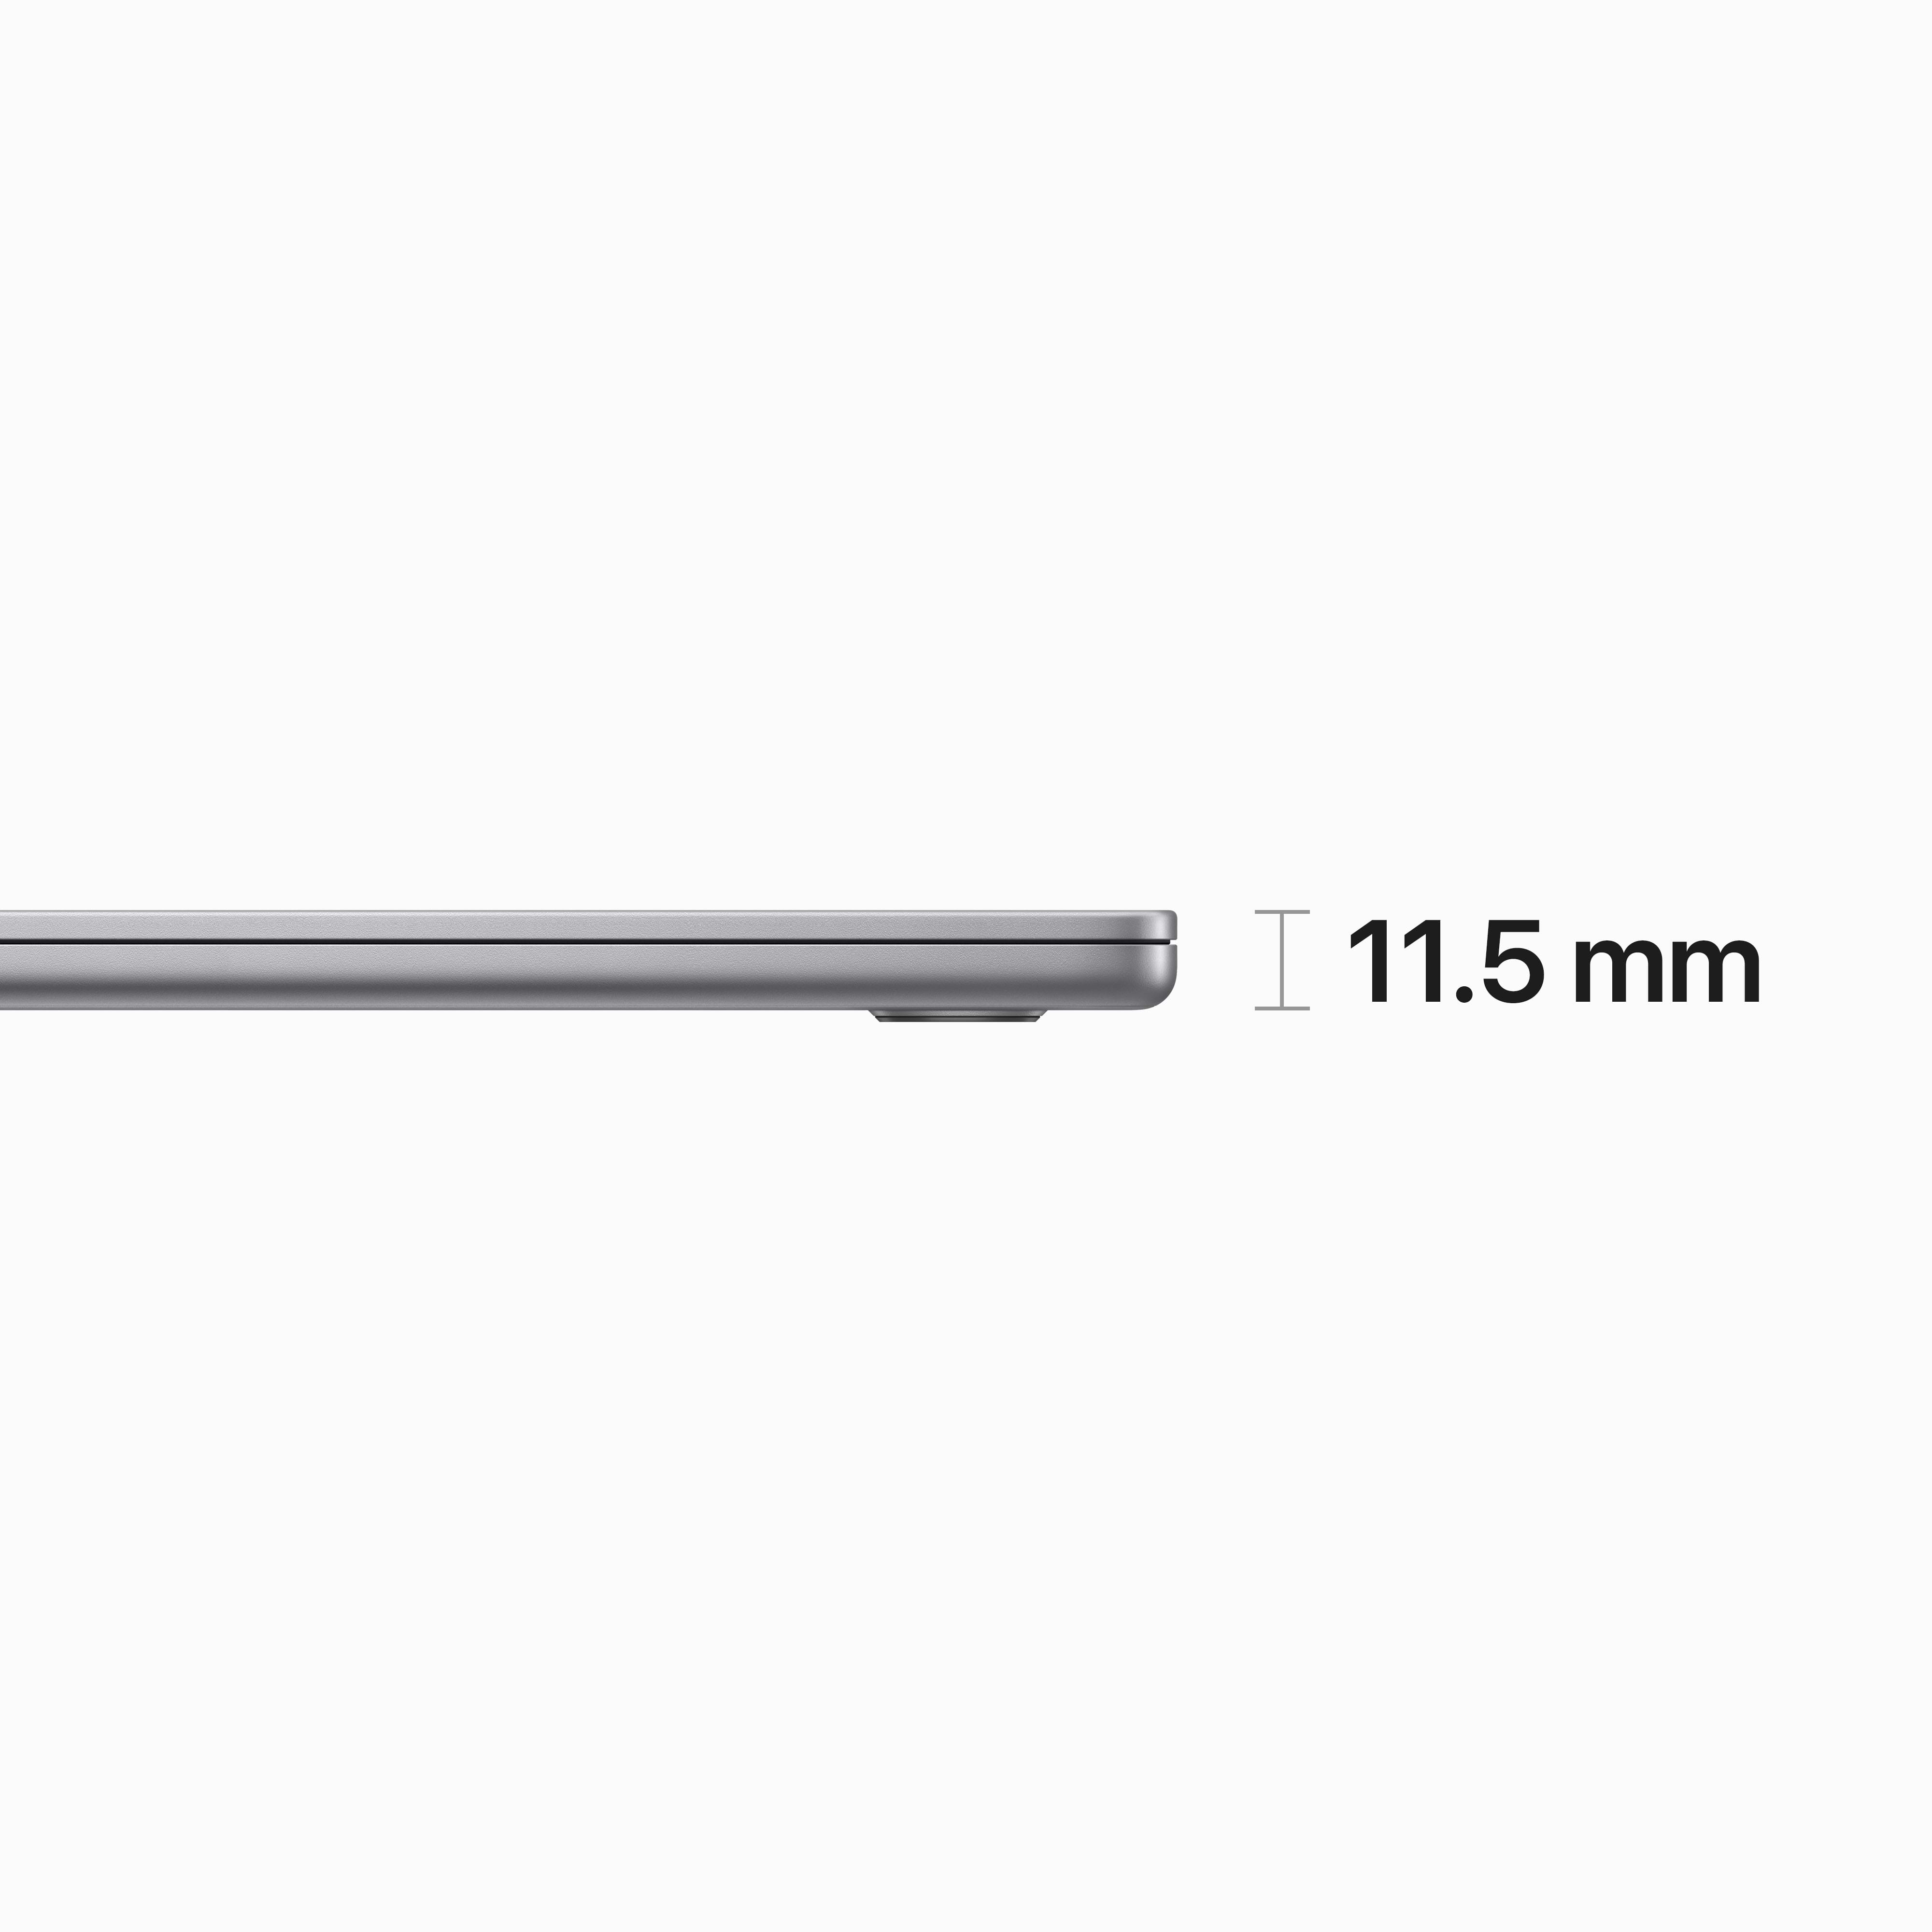 '15-inch MacBook Air: Apple M2 chip with 8-core CPU and 10-core GPU 256GB - Space Grey  מחשב אייקון  נייד'